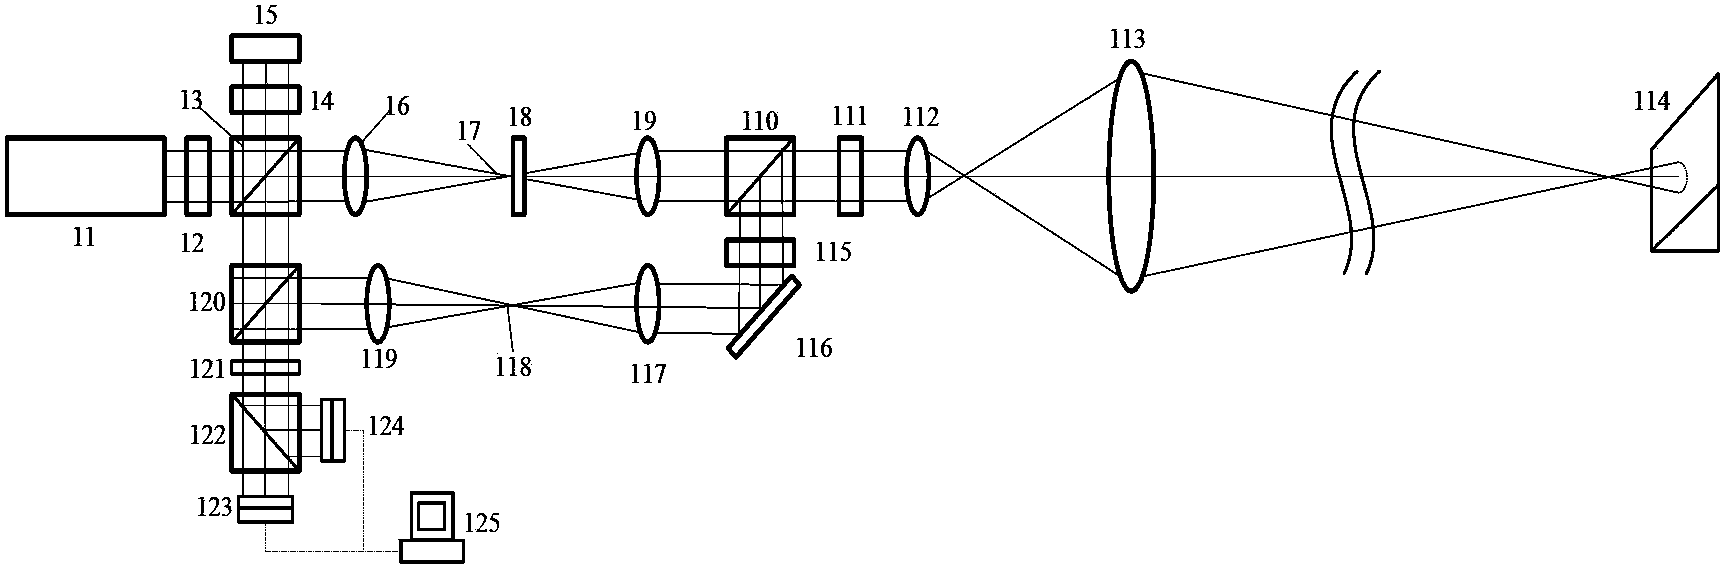 Phase-difference autofocus method for synthetic aperture imaging lidar